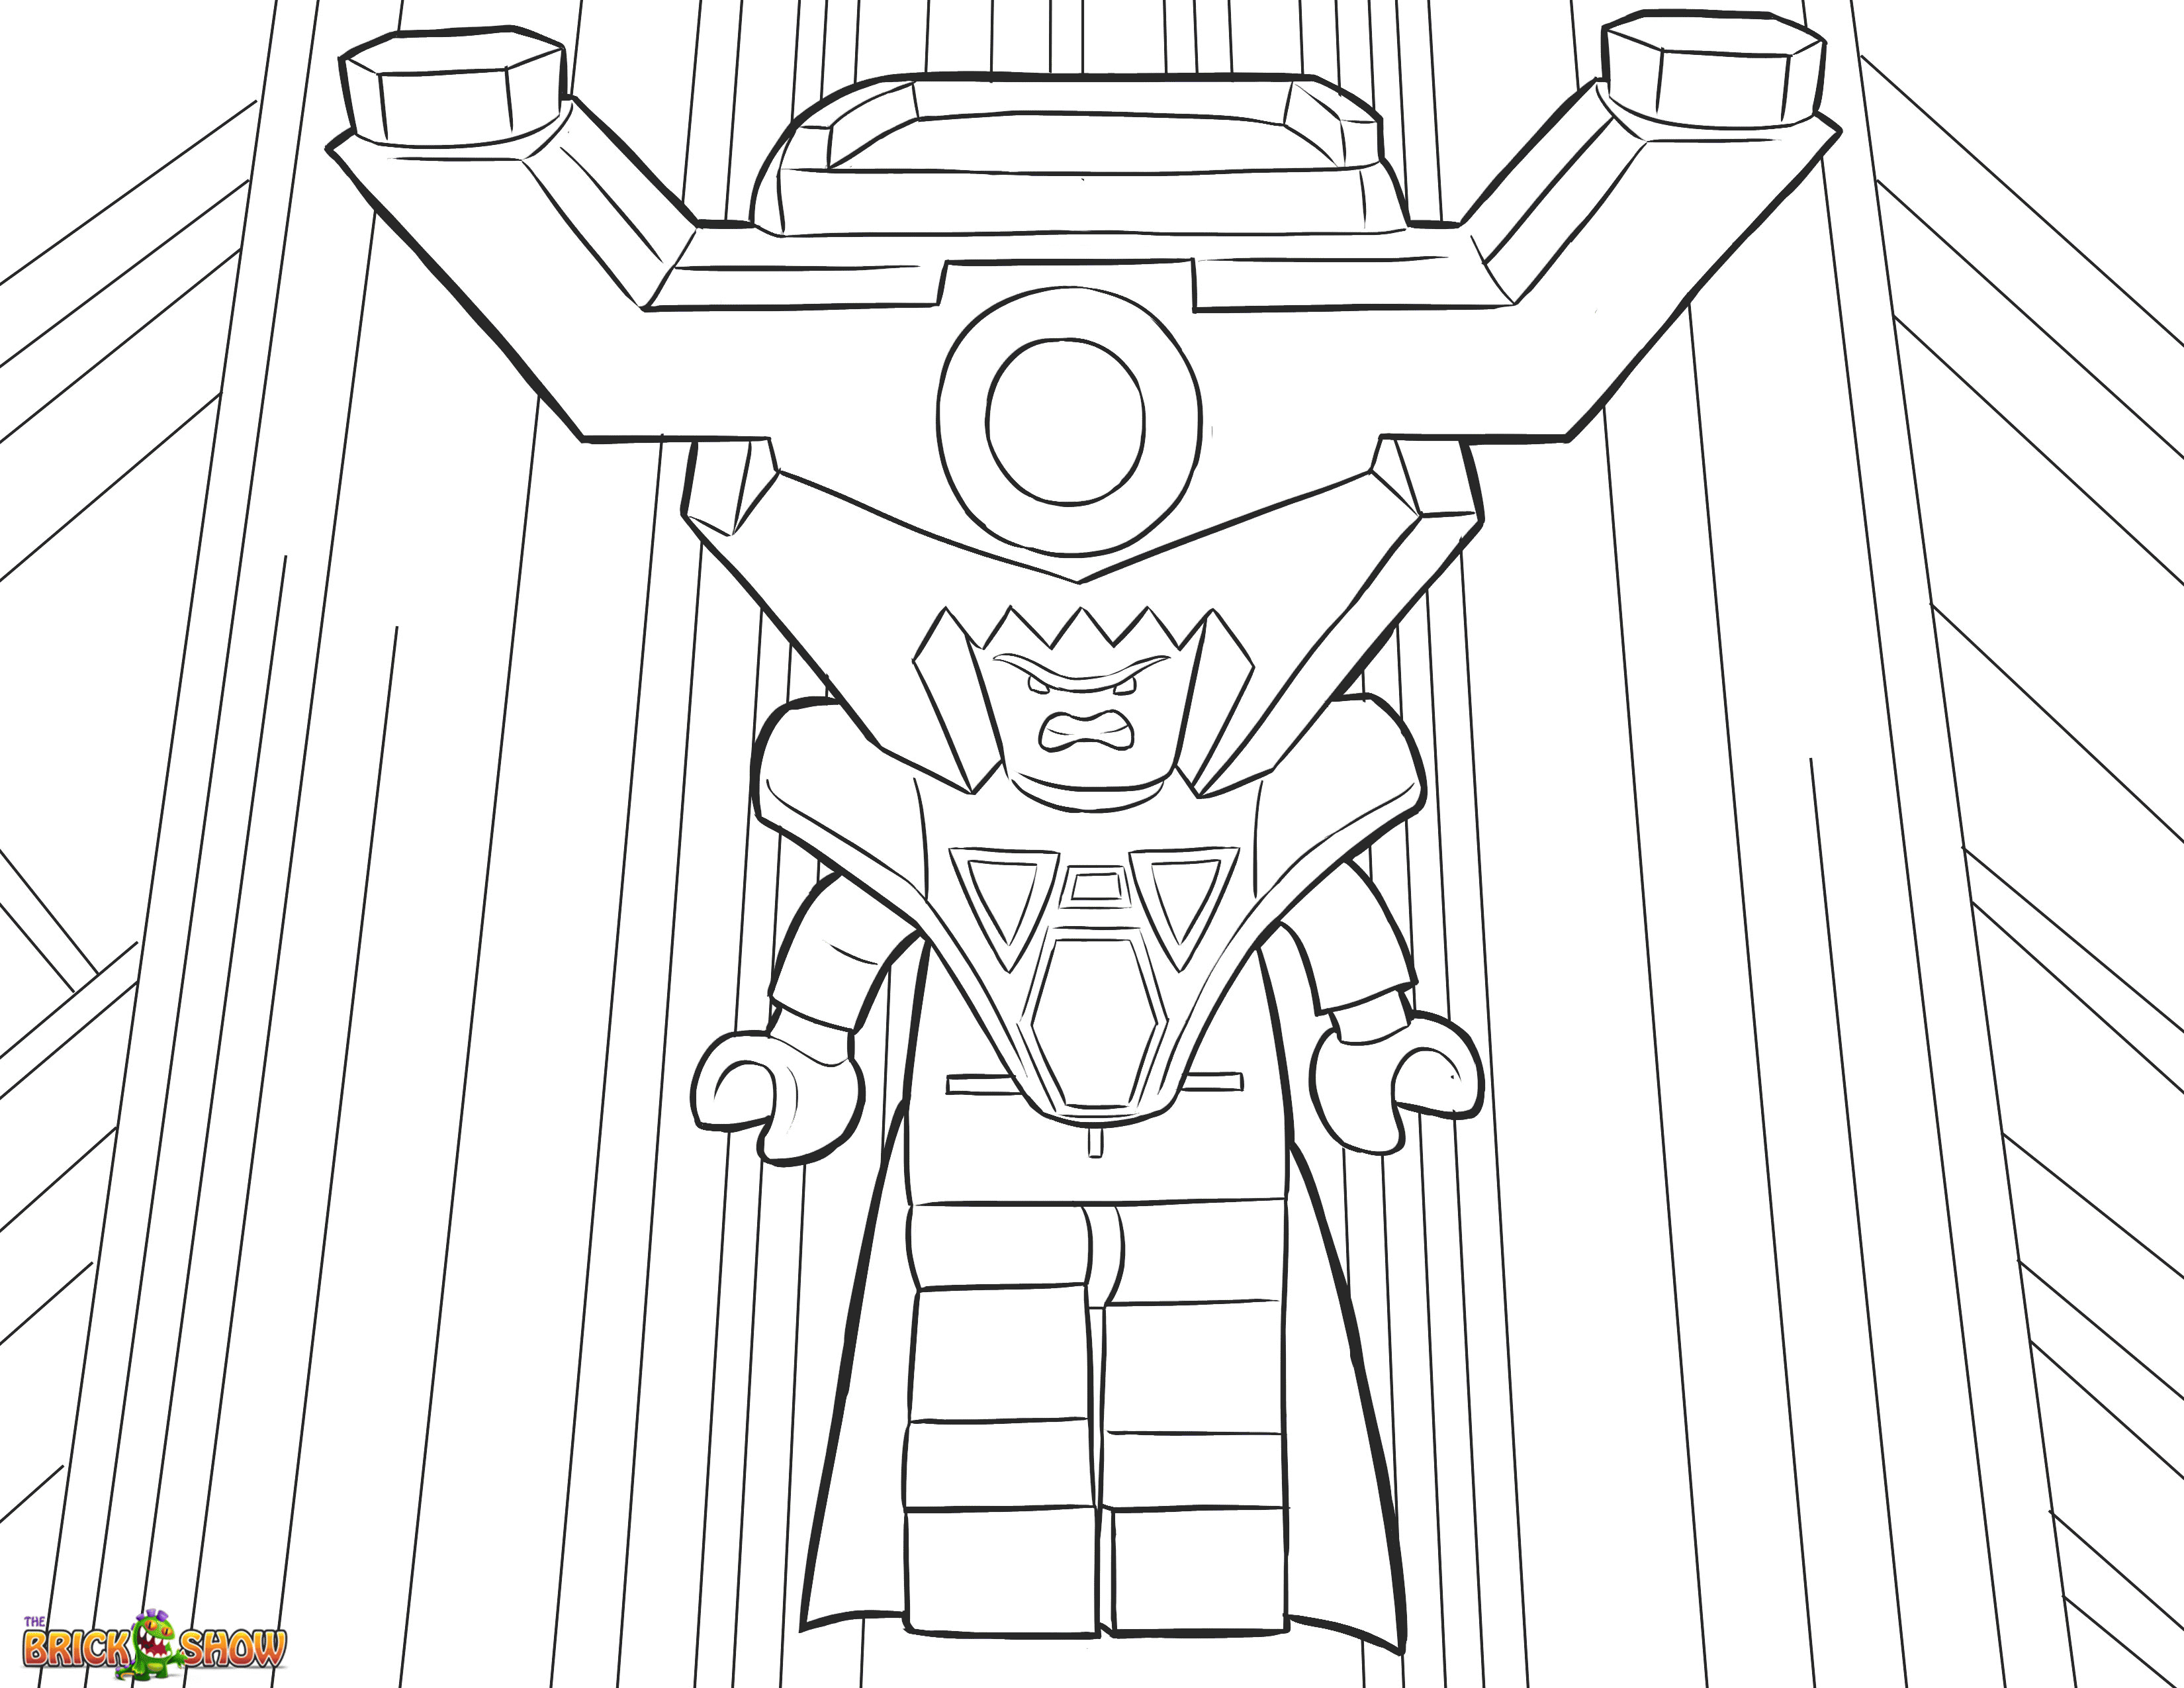 Lord Business Coloring Page, Printable Sheet - The LEGO Movie